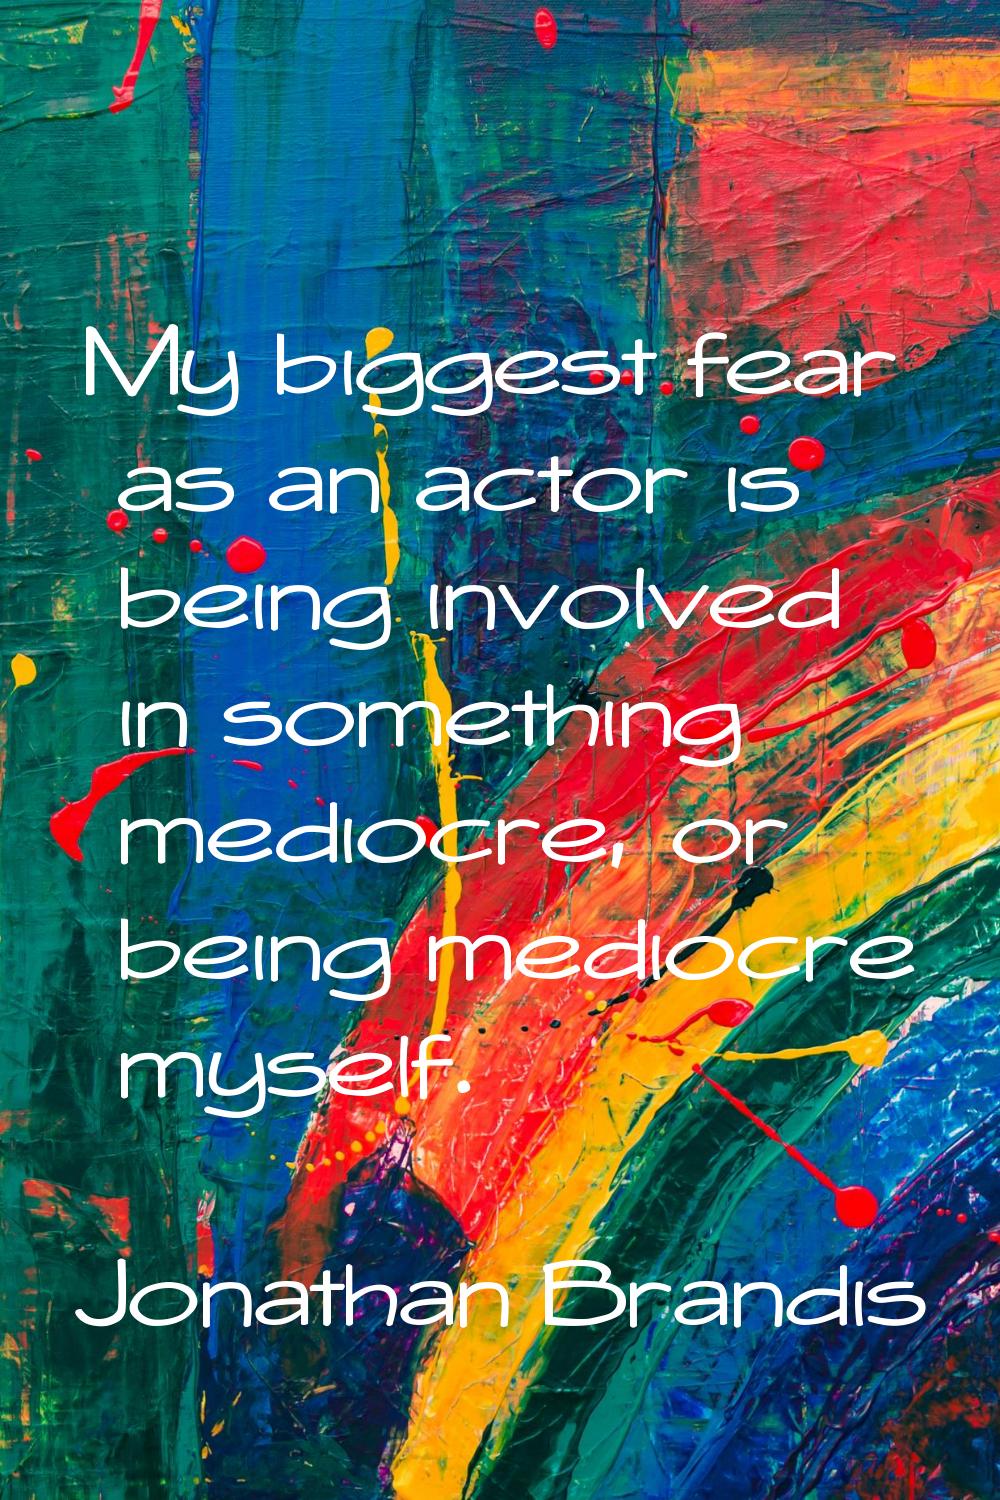 My biggest fear as an actor is being involved in something mediocre, or being mediocre myself.